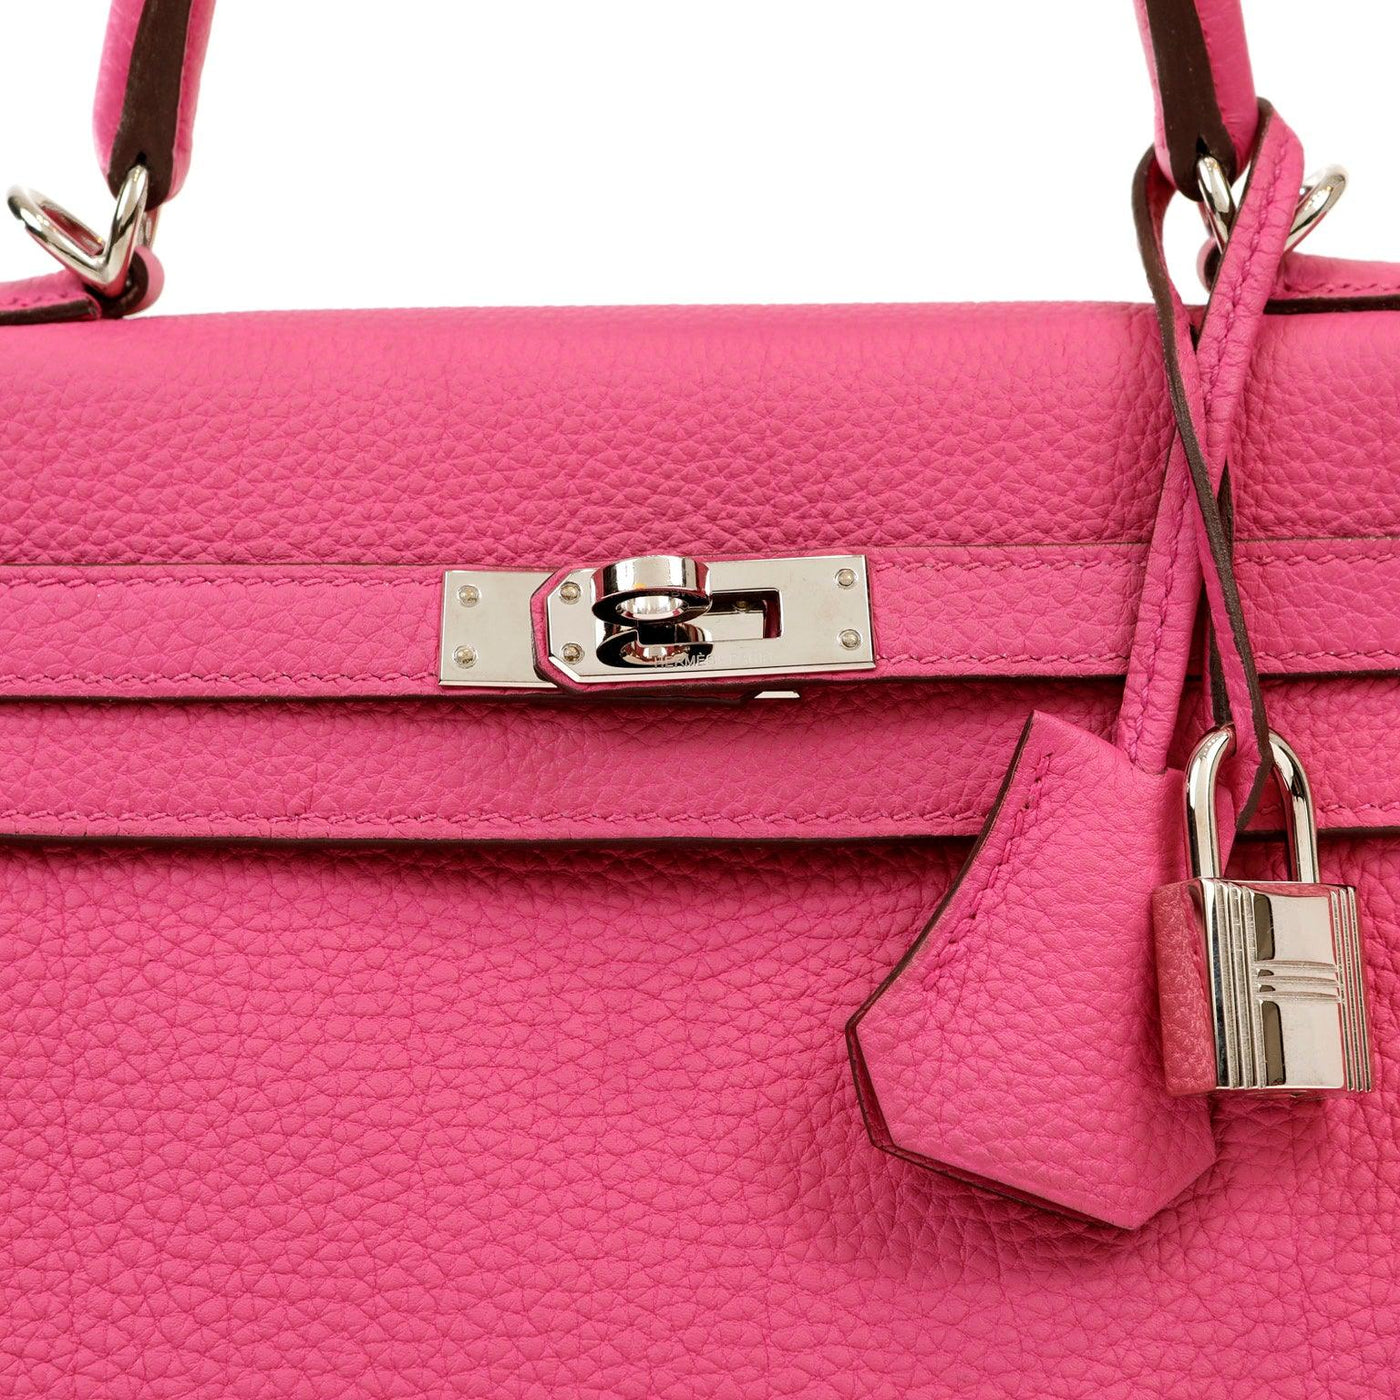 Add a pop of color to your wardrobe with the Hermès 25cm Pink Magnolia Togo  Kelly handbag – Only Authentics